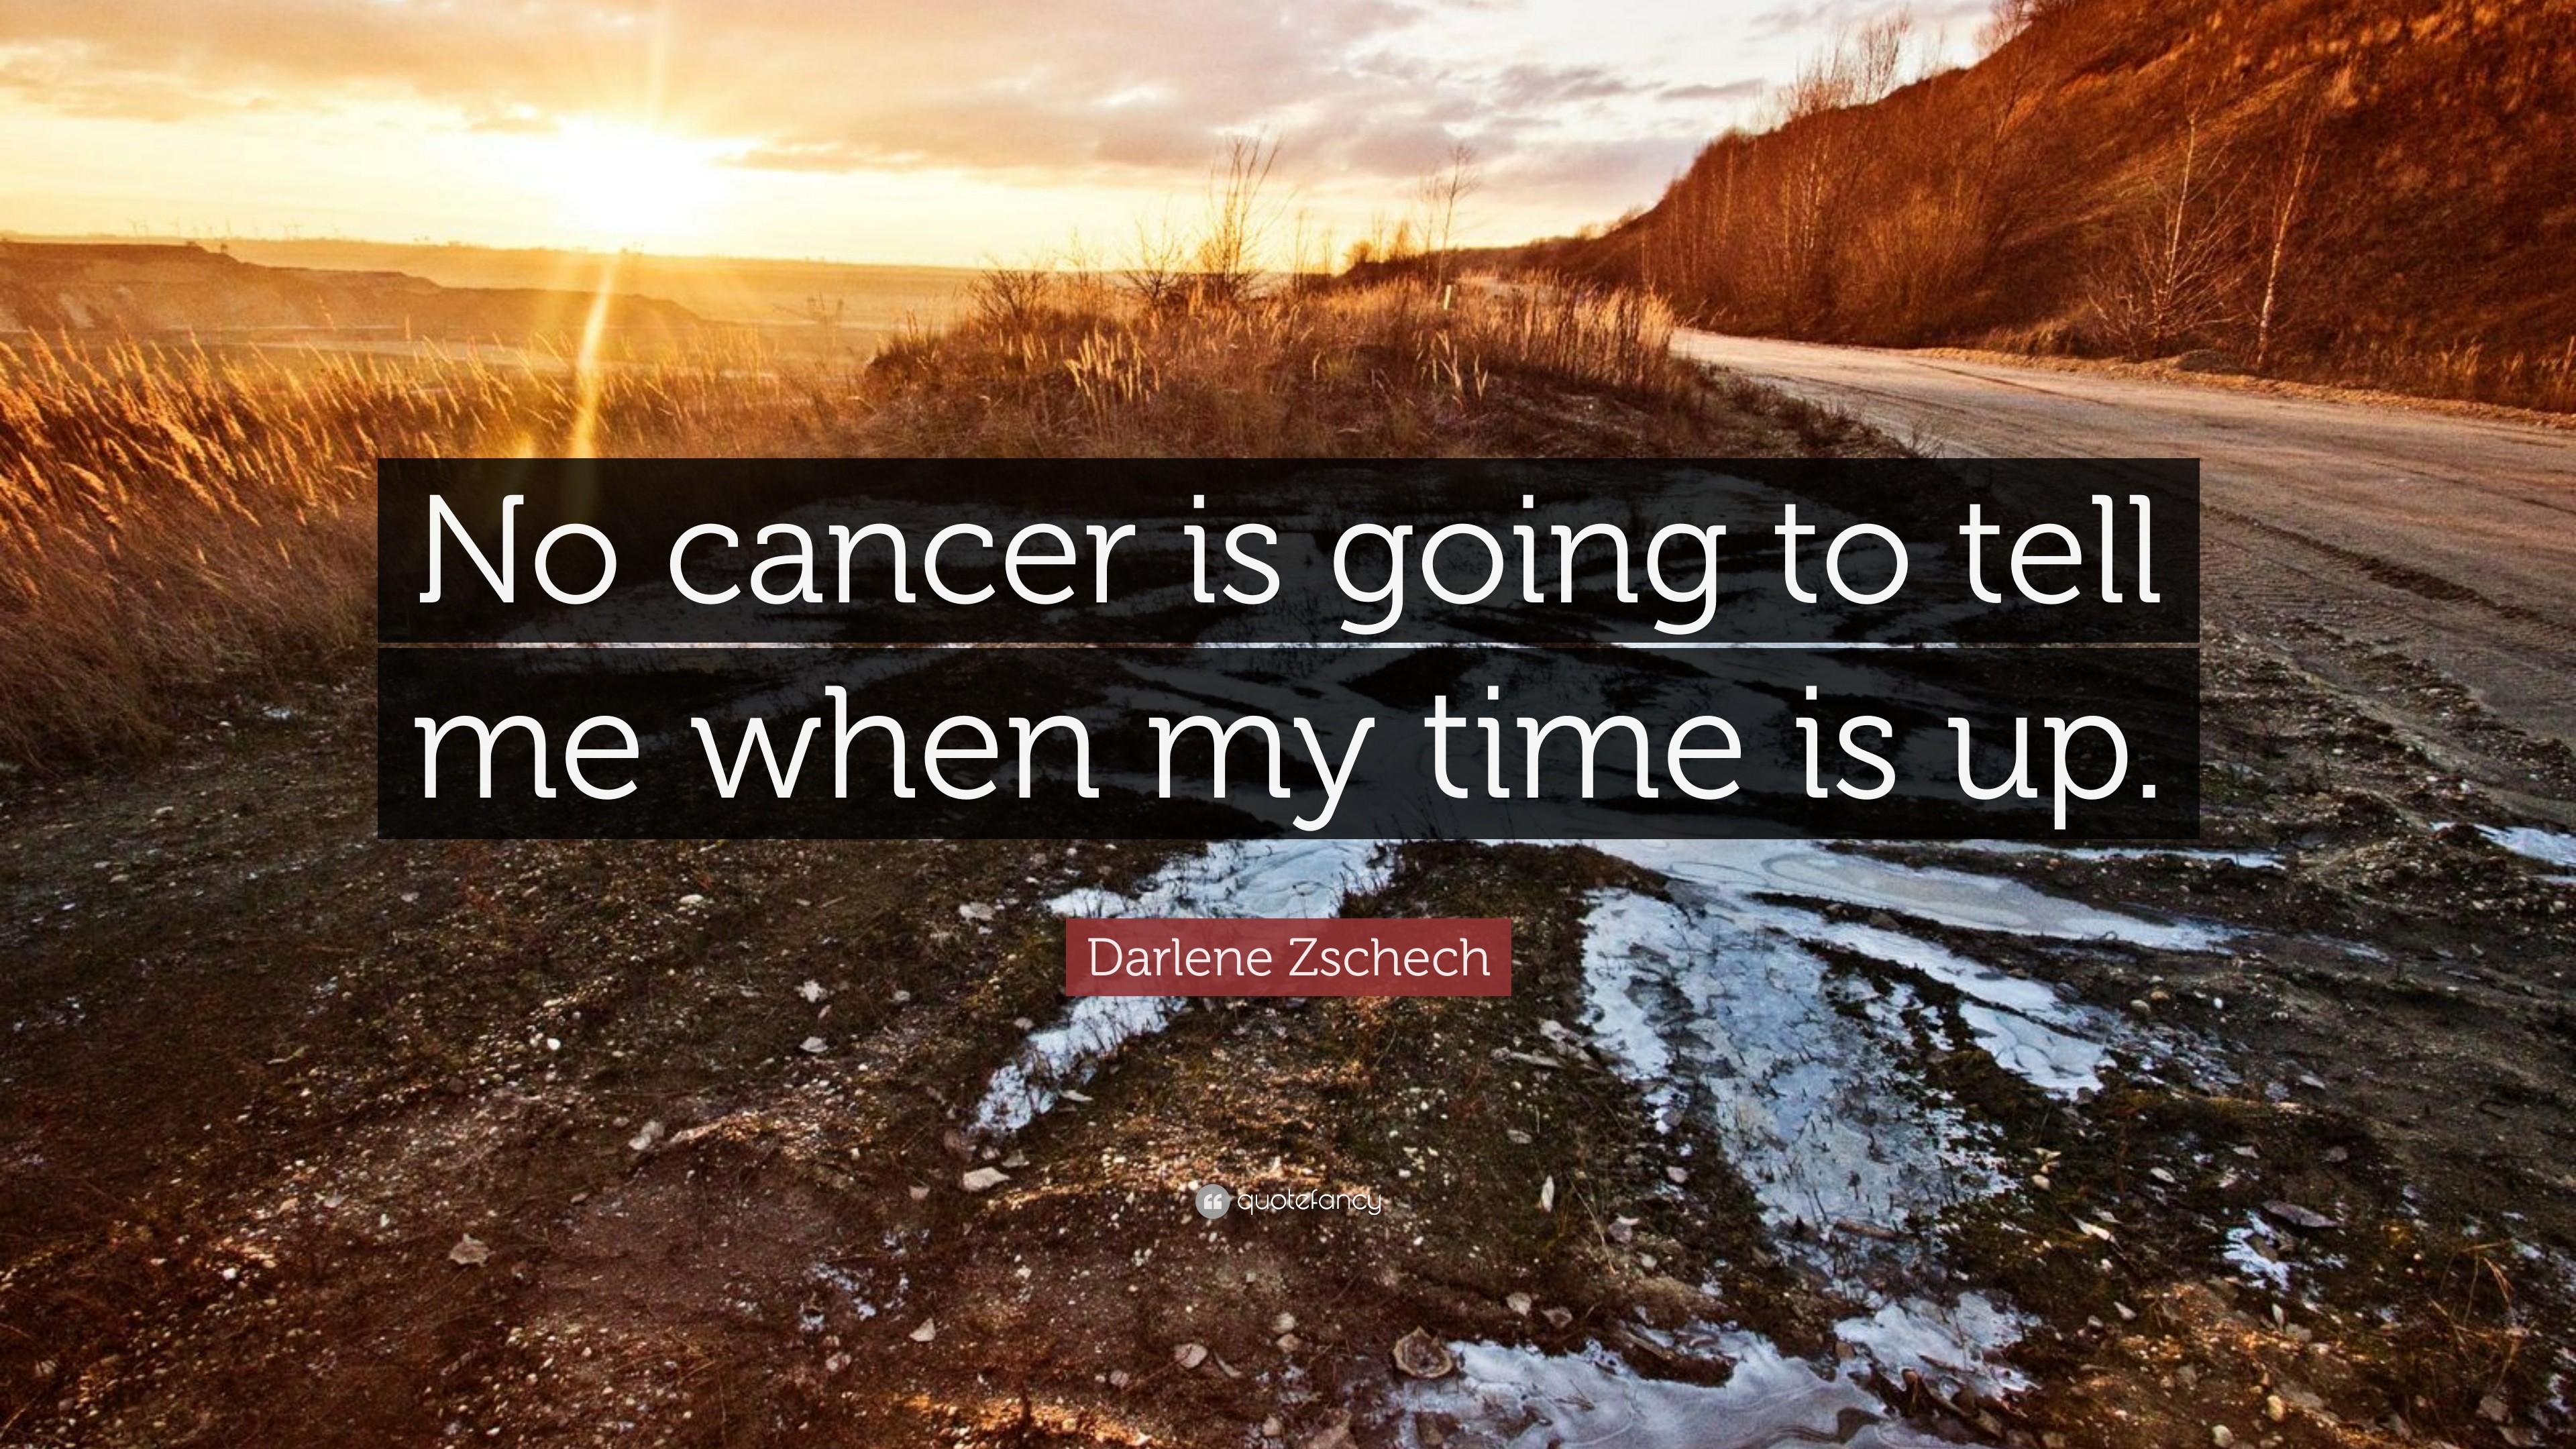 Darlene Zschech Quote: “No cancer is going to tell me when my time ...